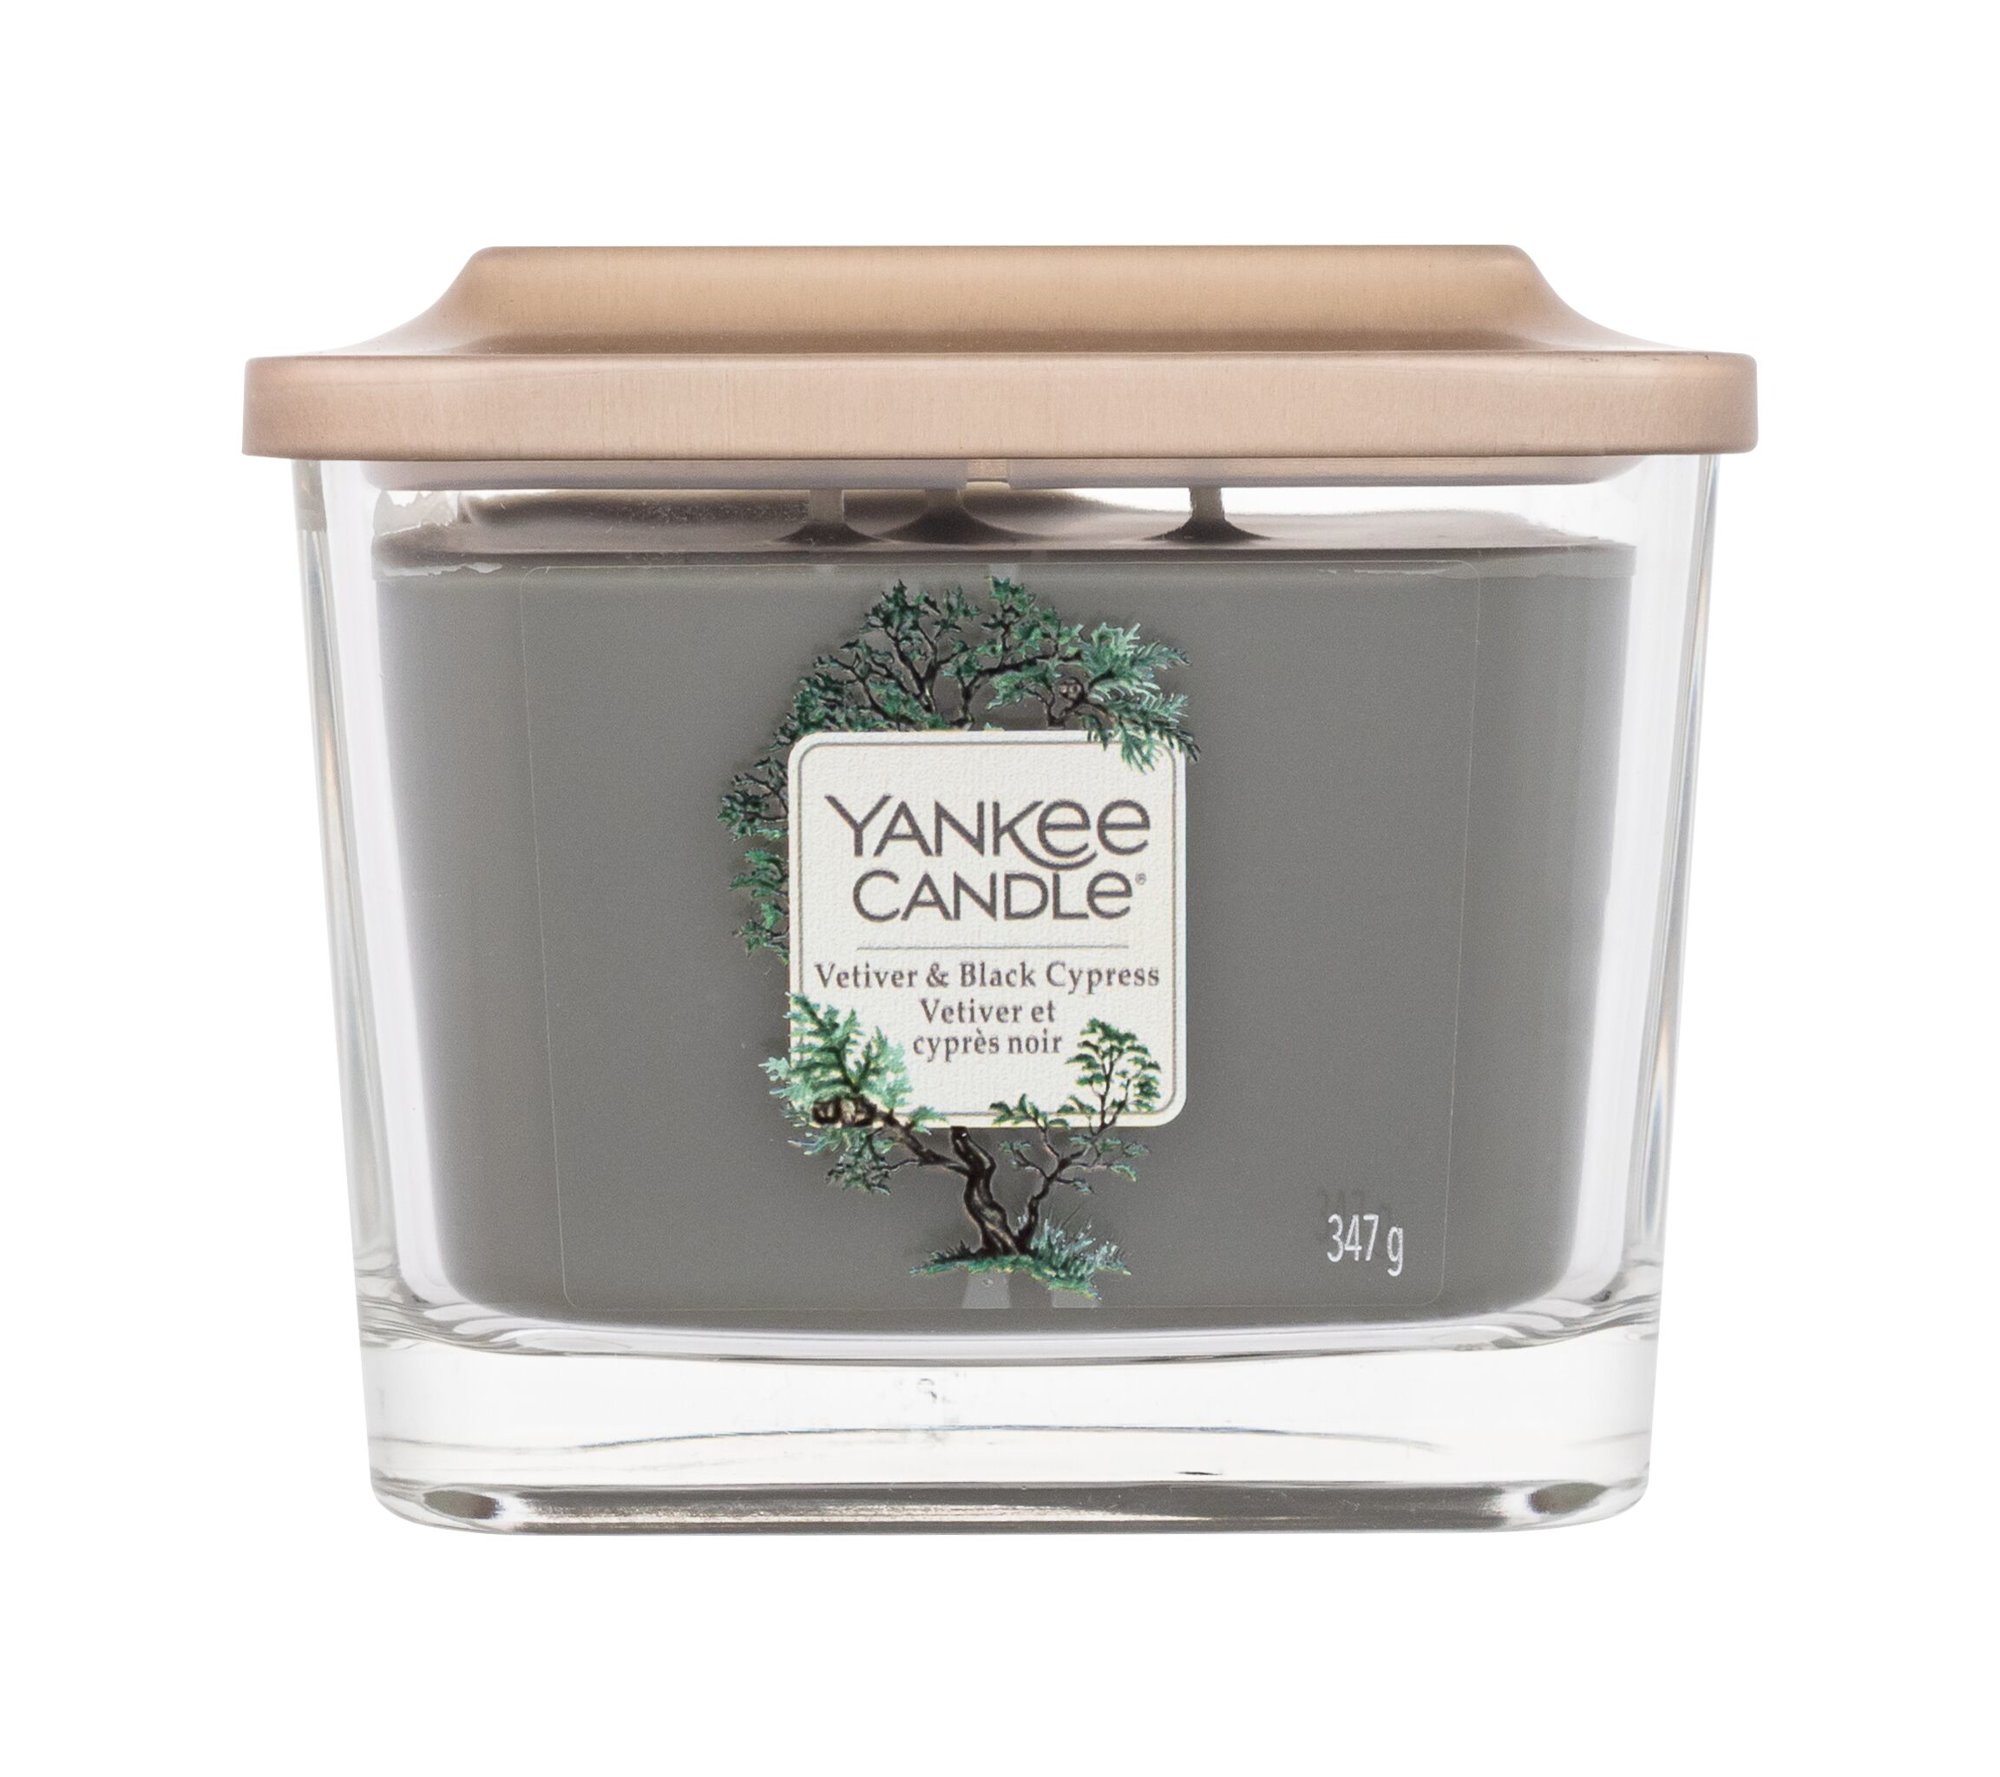 Yankee Candle Elevation Collection Vetiver & Black Cypress 347g Kvepalai Unisex Scented Candle